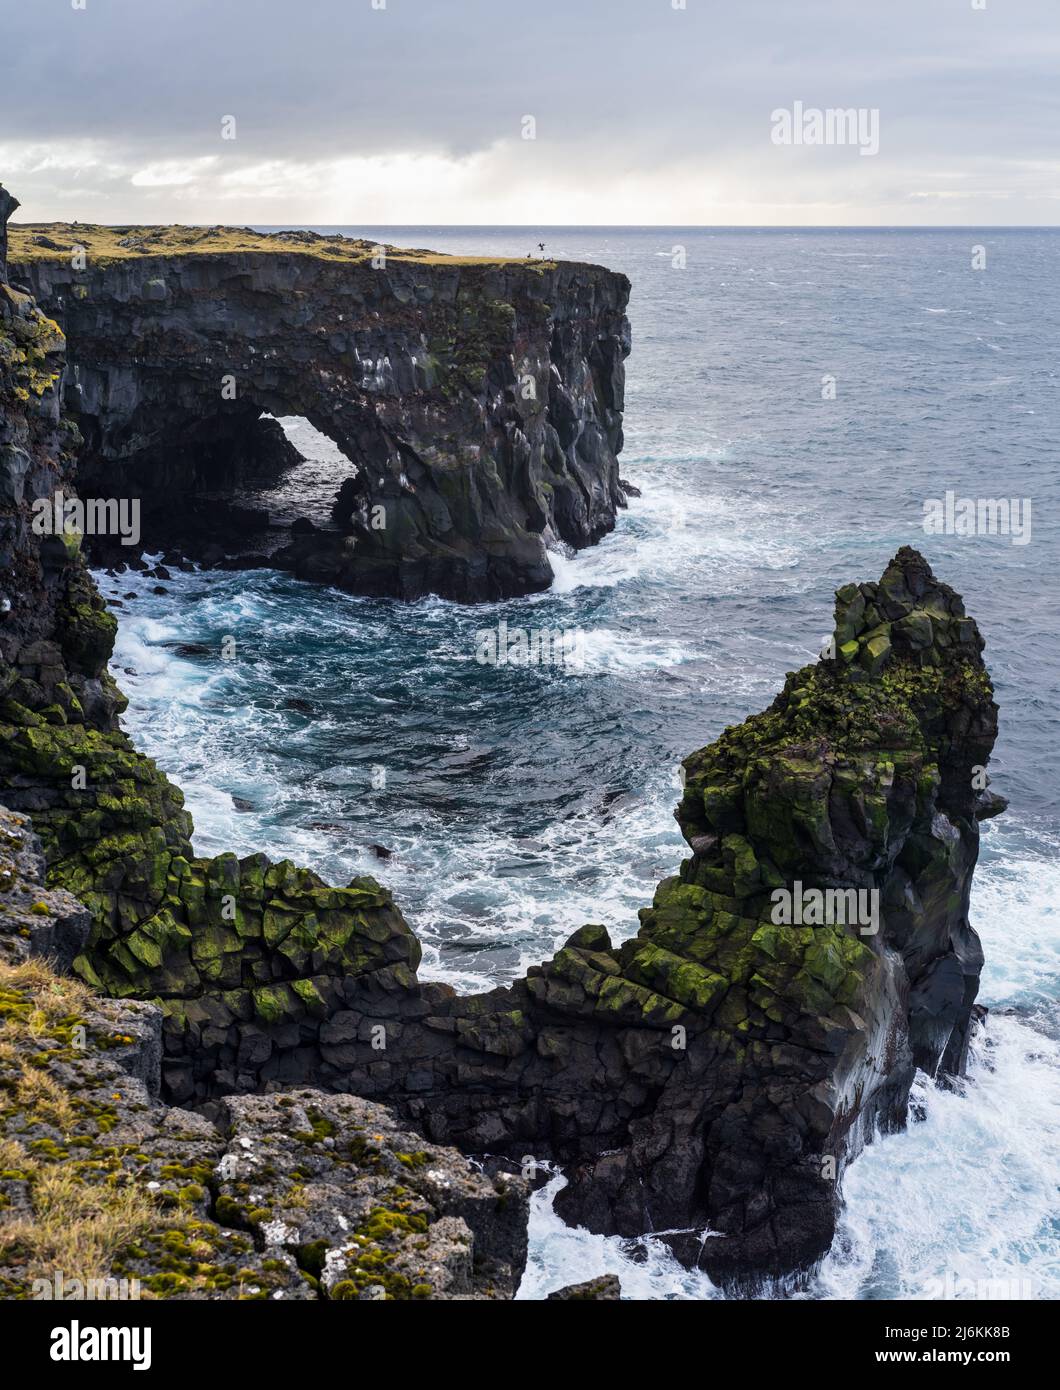 View during auto trip in East Iceland, Snaefellsnes peninsula, View Point near Svortuloft Lighthouse. Spectacular black volcanic rocky ocean coast wit Stock Photo